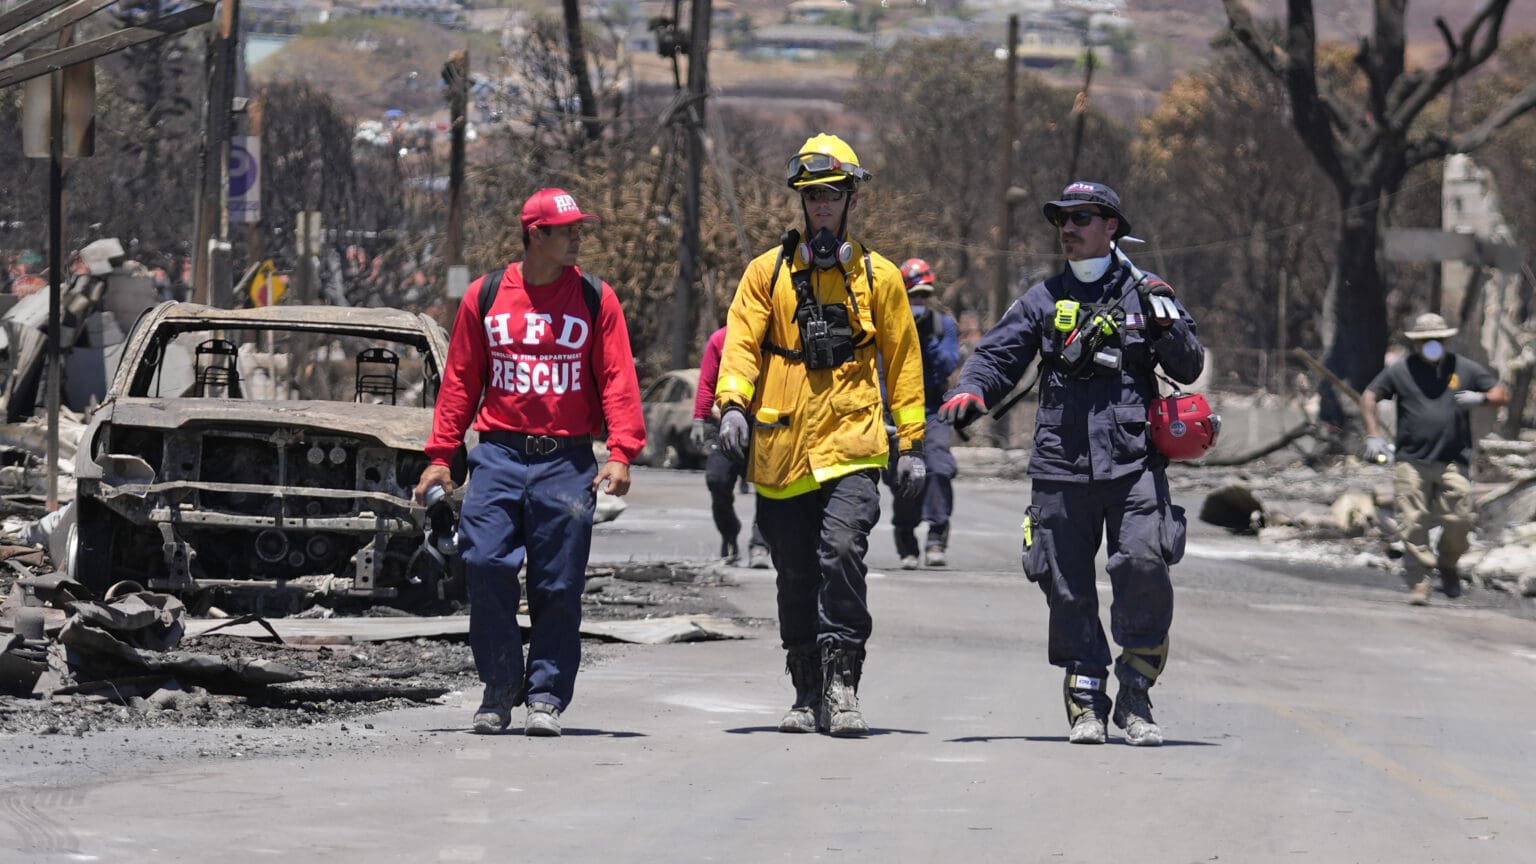 Members of a search-and-rescue team walk along a street Saturday